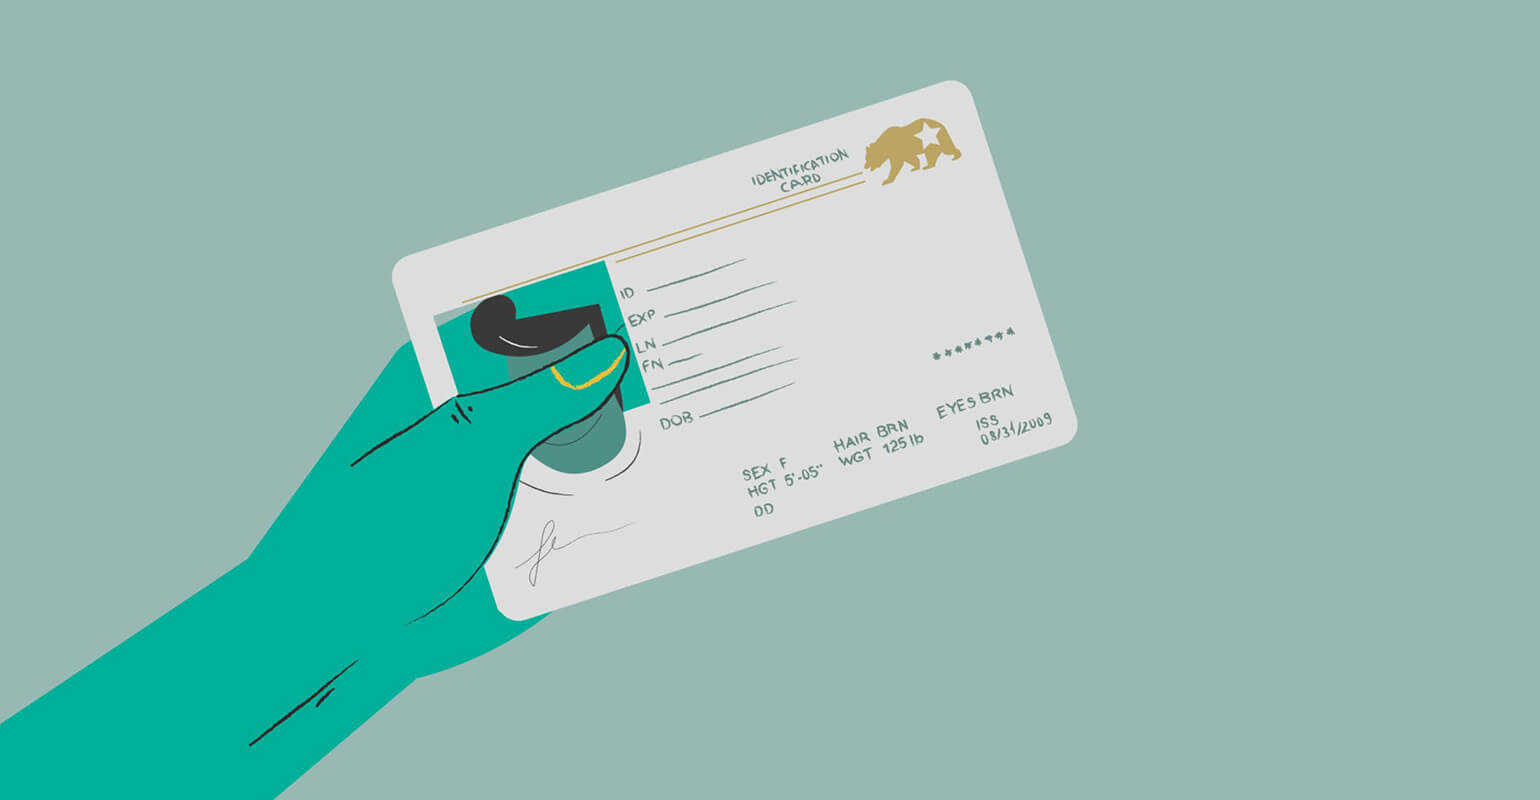 Cartoon image of a green hand holding an official ID. The picture and words on the ID are not able to be seen clearly.